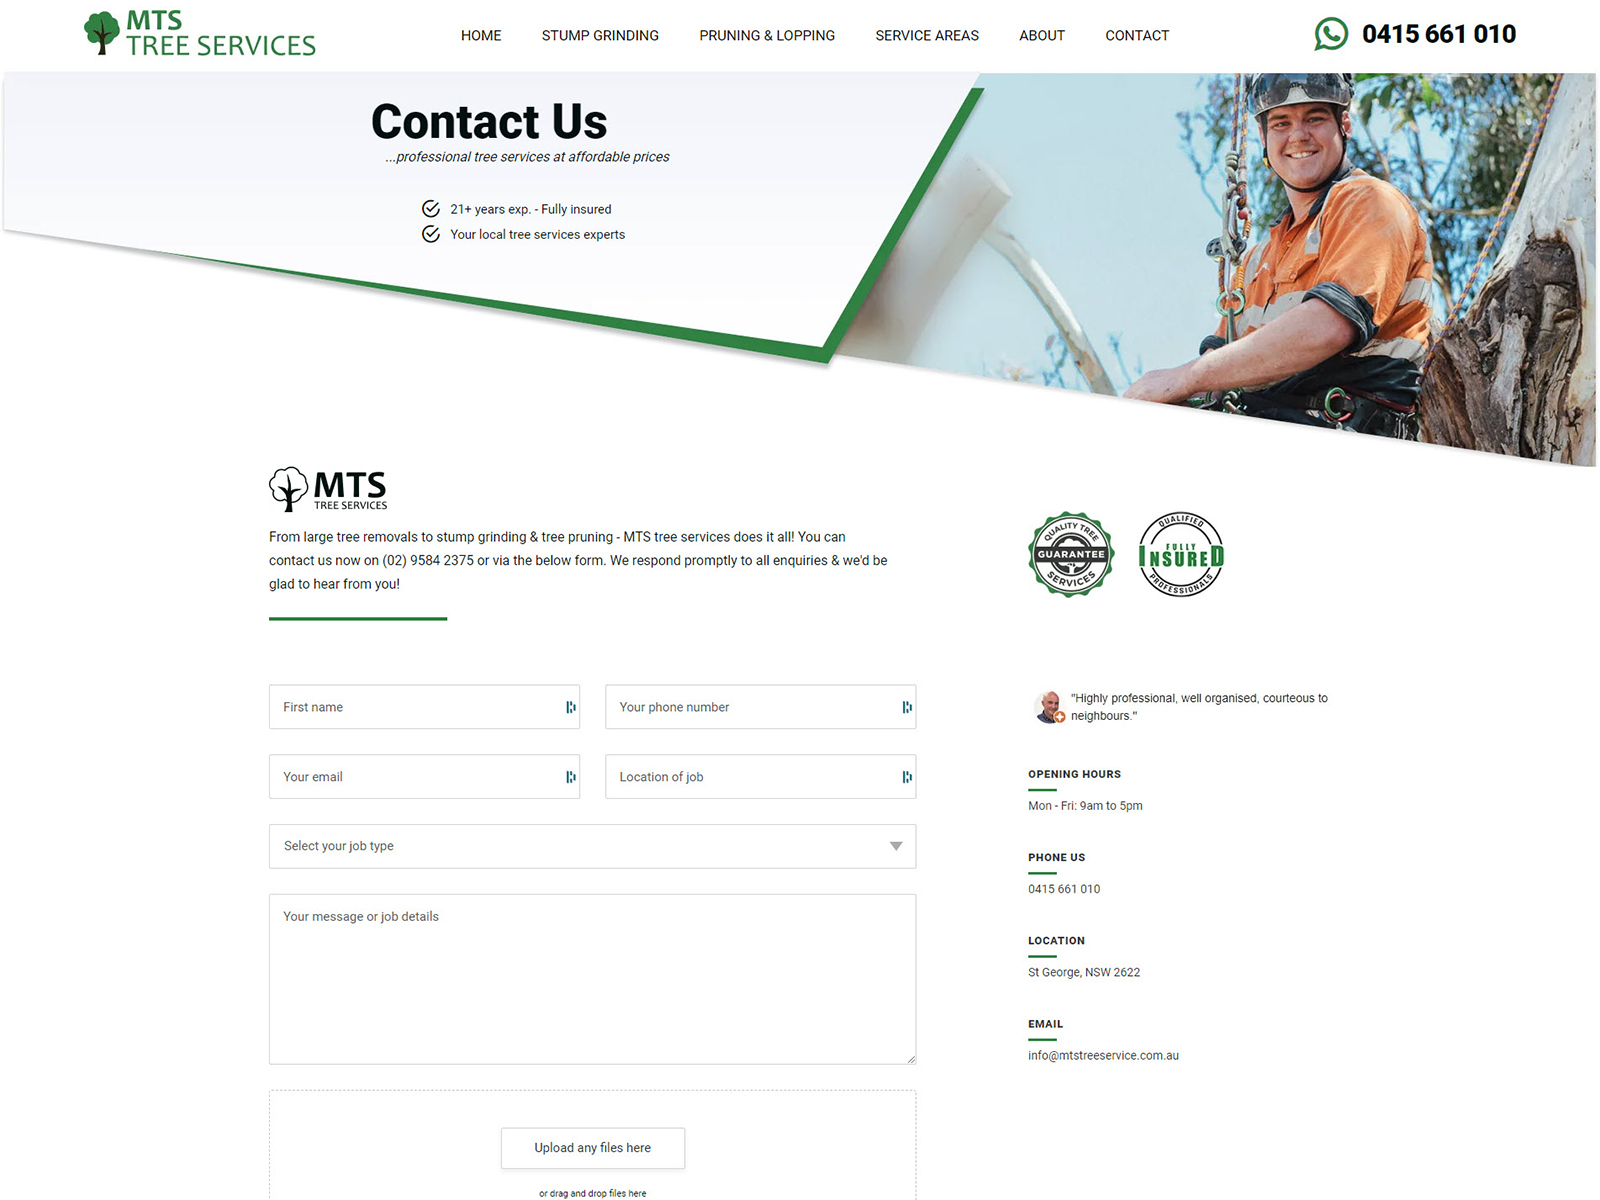 MTS Tree Services Contact Us Page